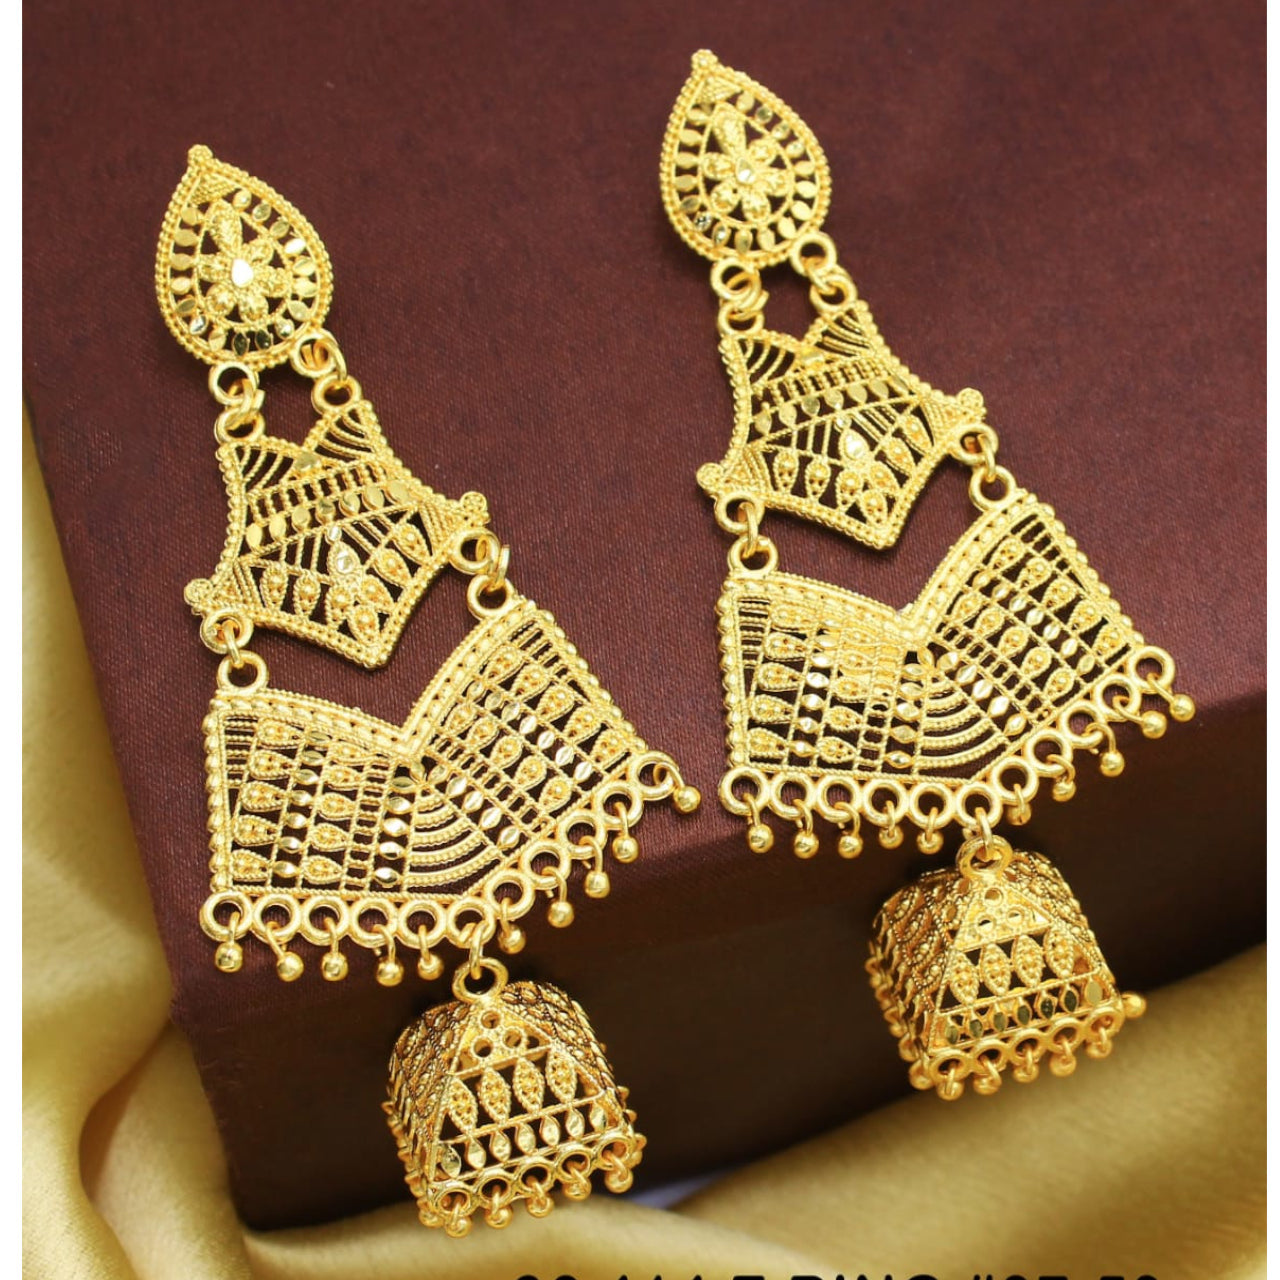 Gold Plated Jhumka Earrings from Bhagya Lakshmi - Intricately Designed and Lightweight